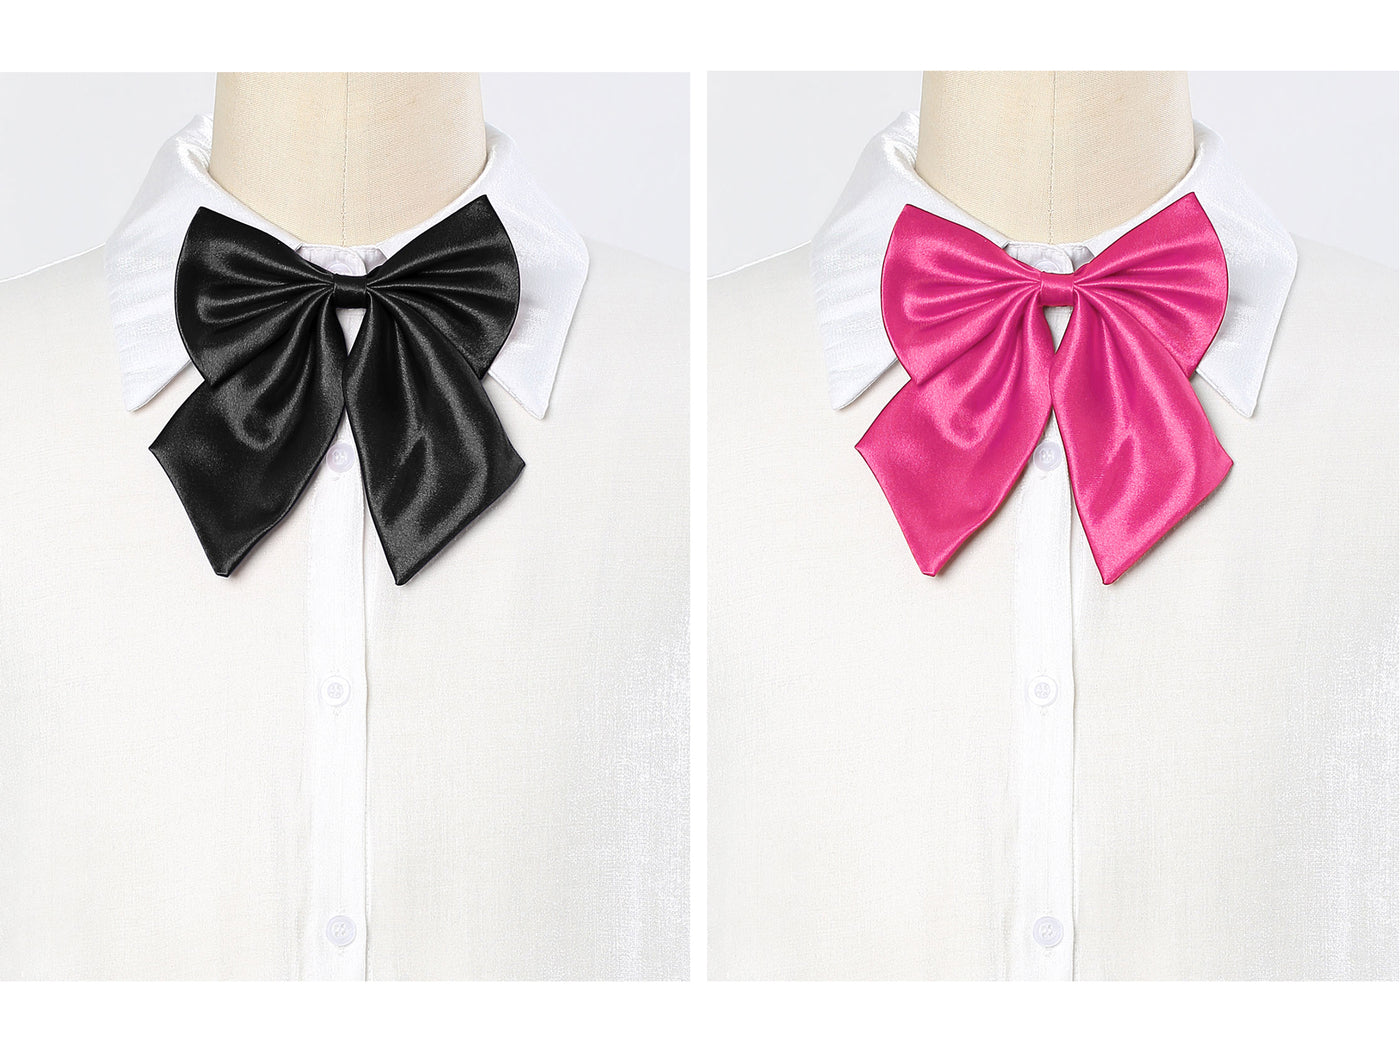 Allegra K Pre-tied Bowknot with Adjustable Neck Strap Cute Bowtie 2 Pcs